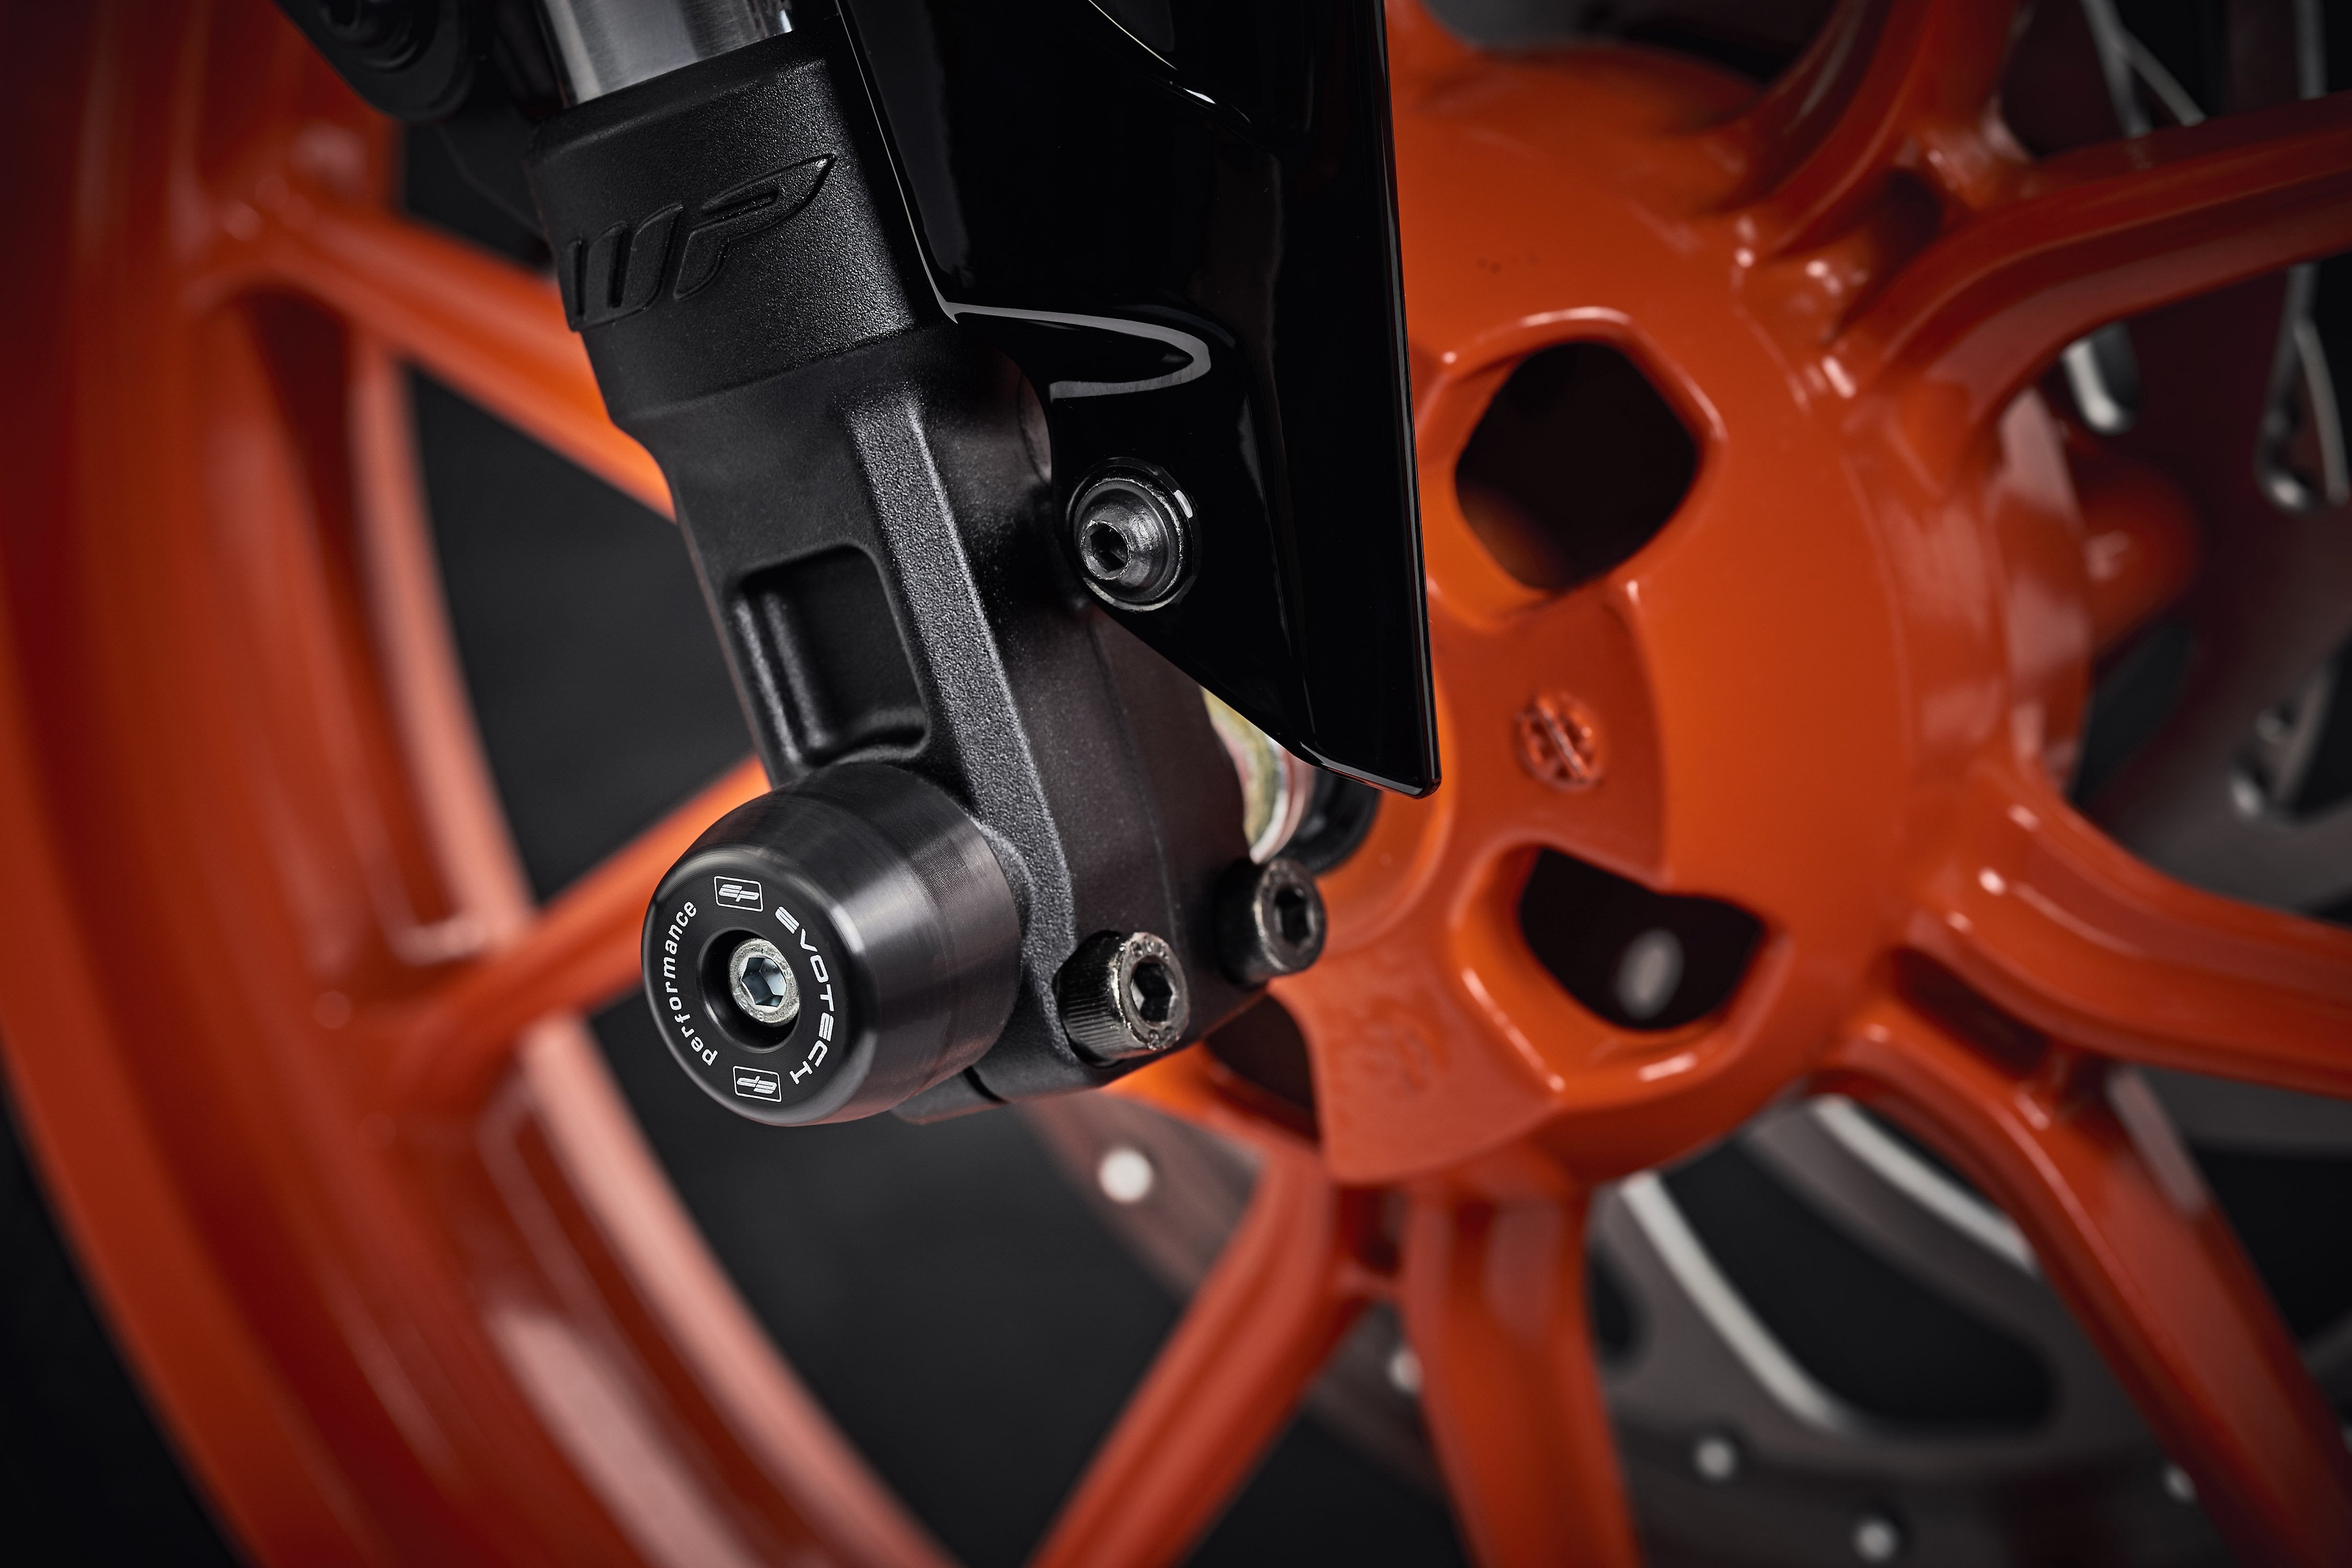 The lower front fork of the KTM 125 Duke with EP Front Spindle Bobbins securely attached, offering crash protection to the motorcycleâs front wheel.